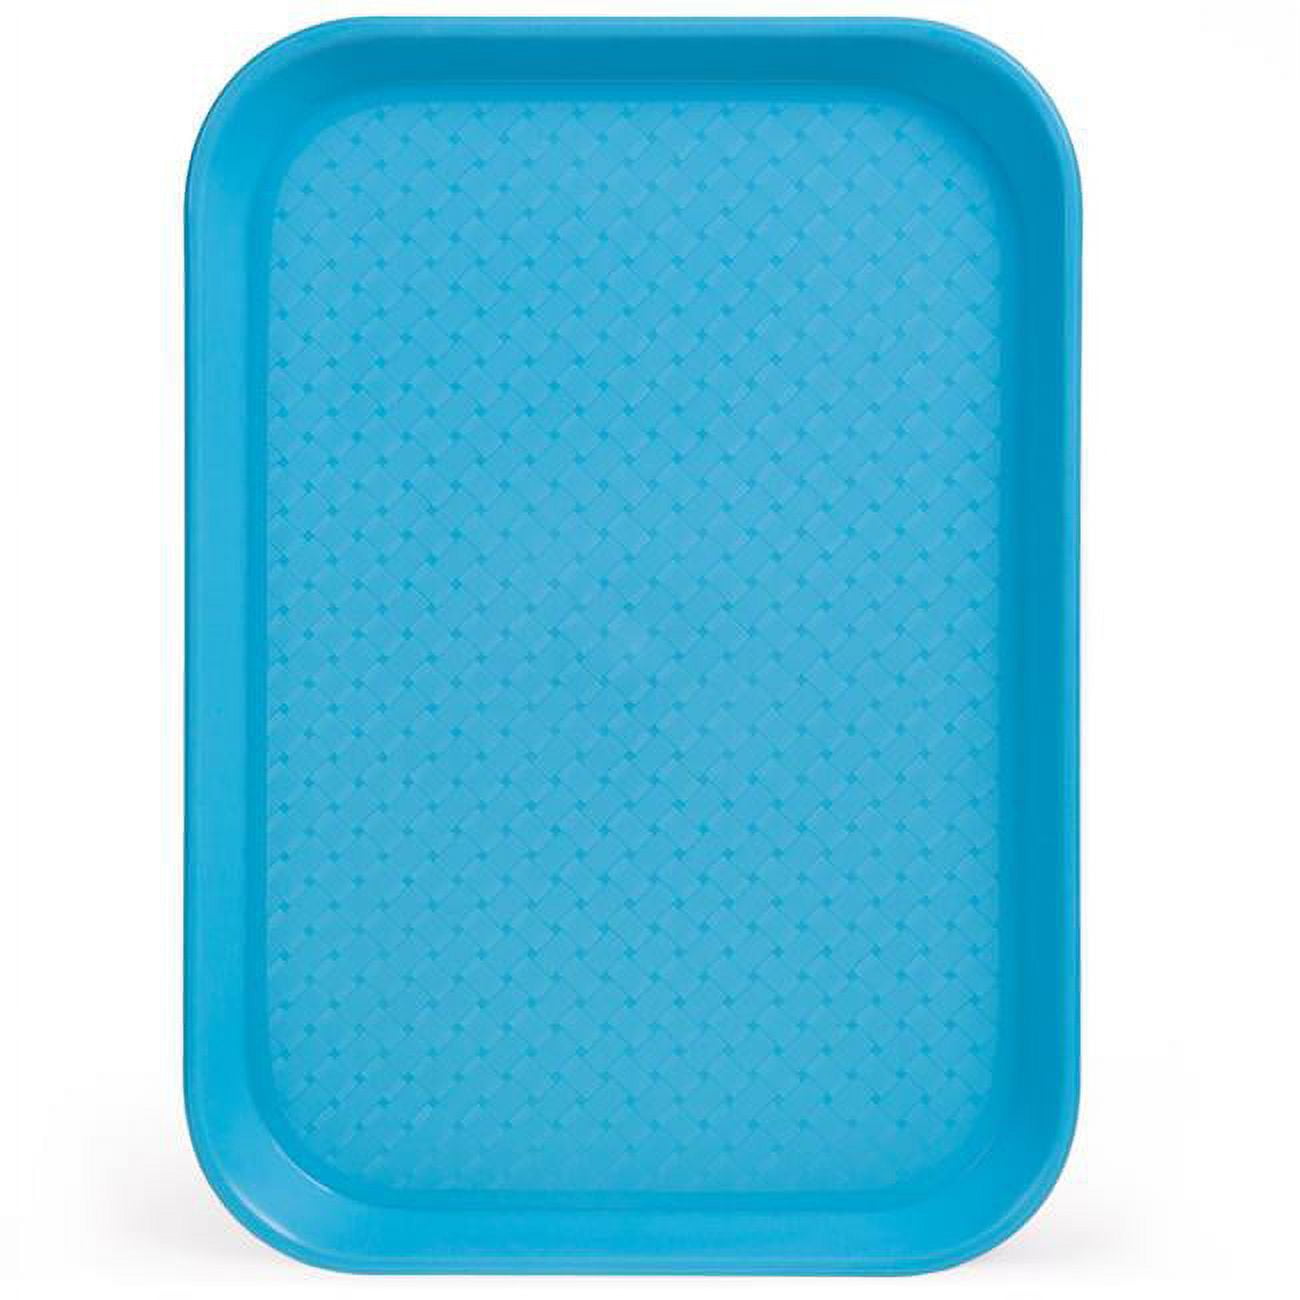 Picture of Brybelly KCAF-102 10 x 14 in. Cafeteria Tray, Blue